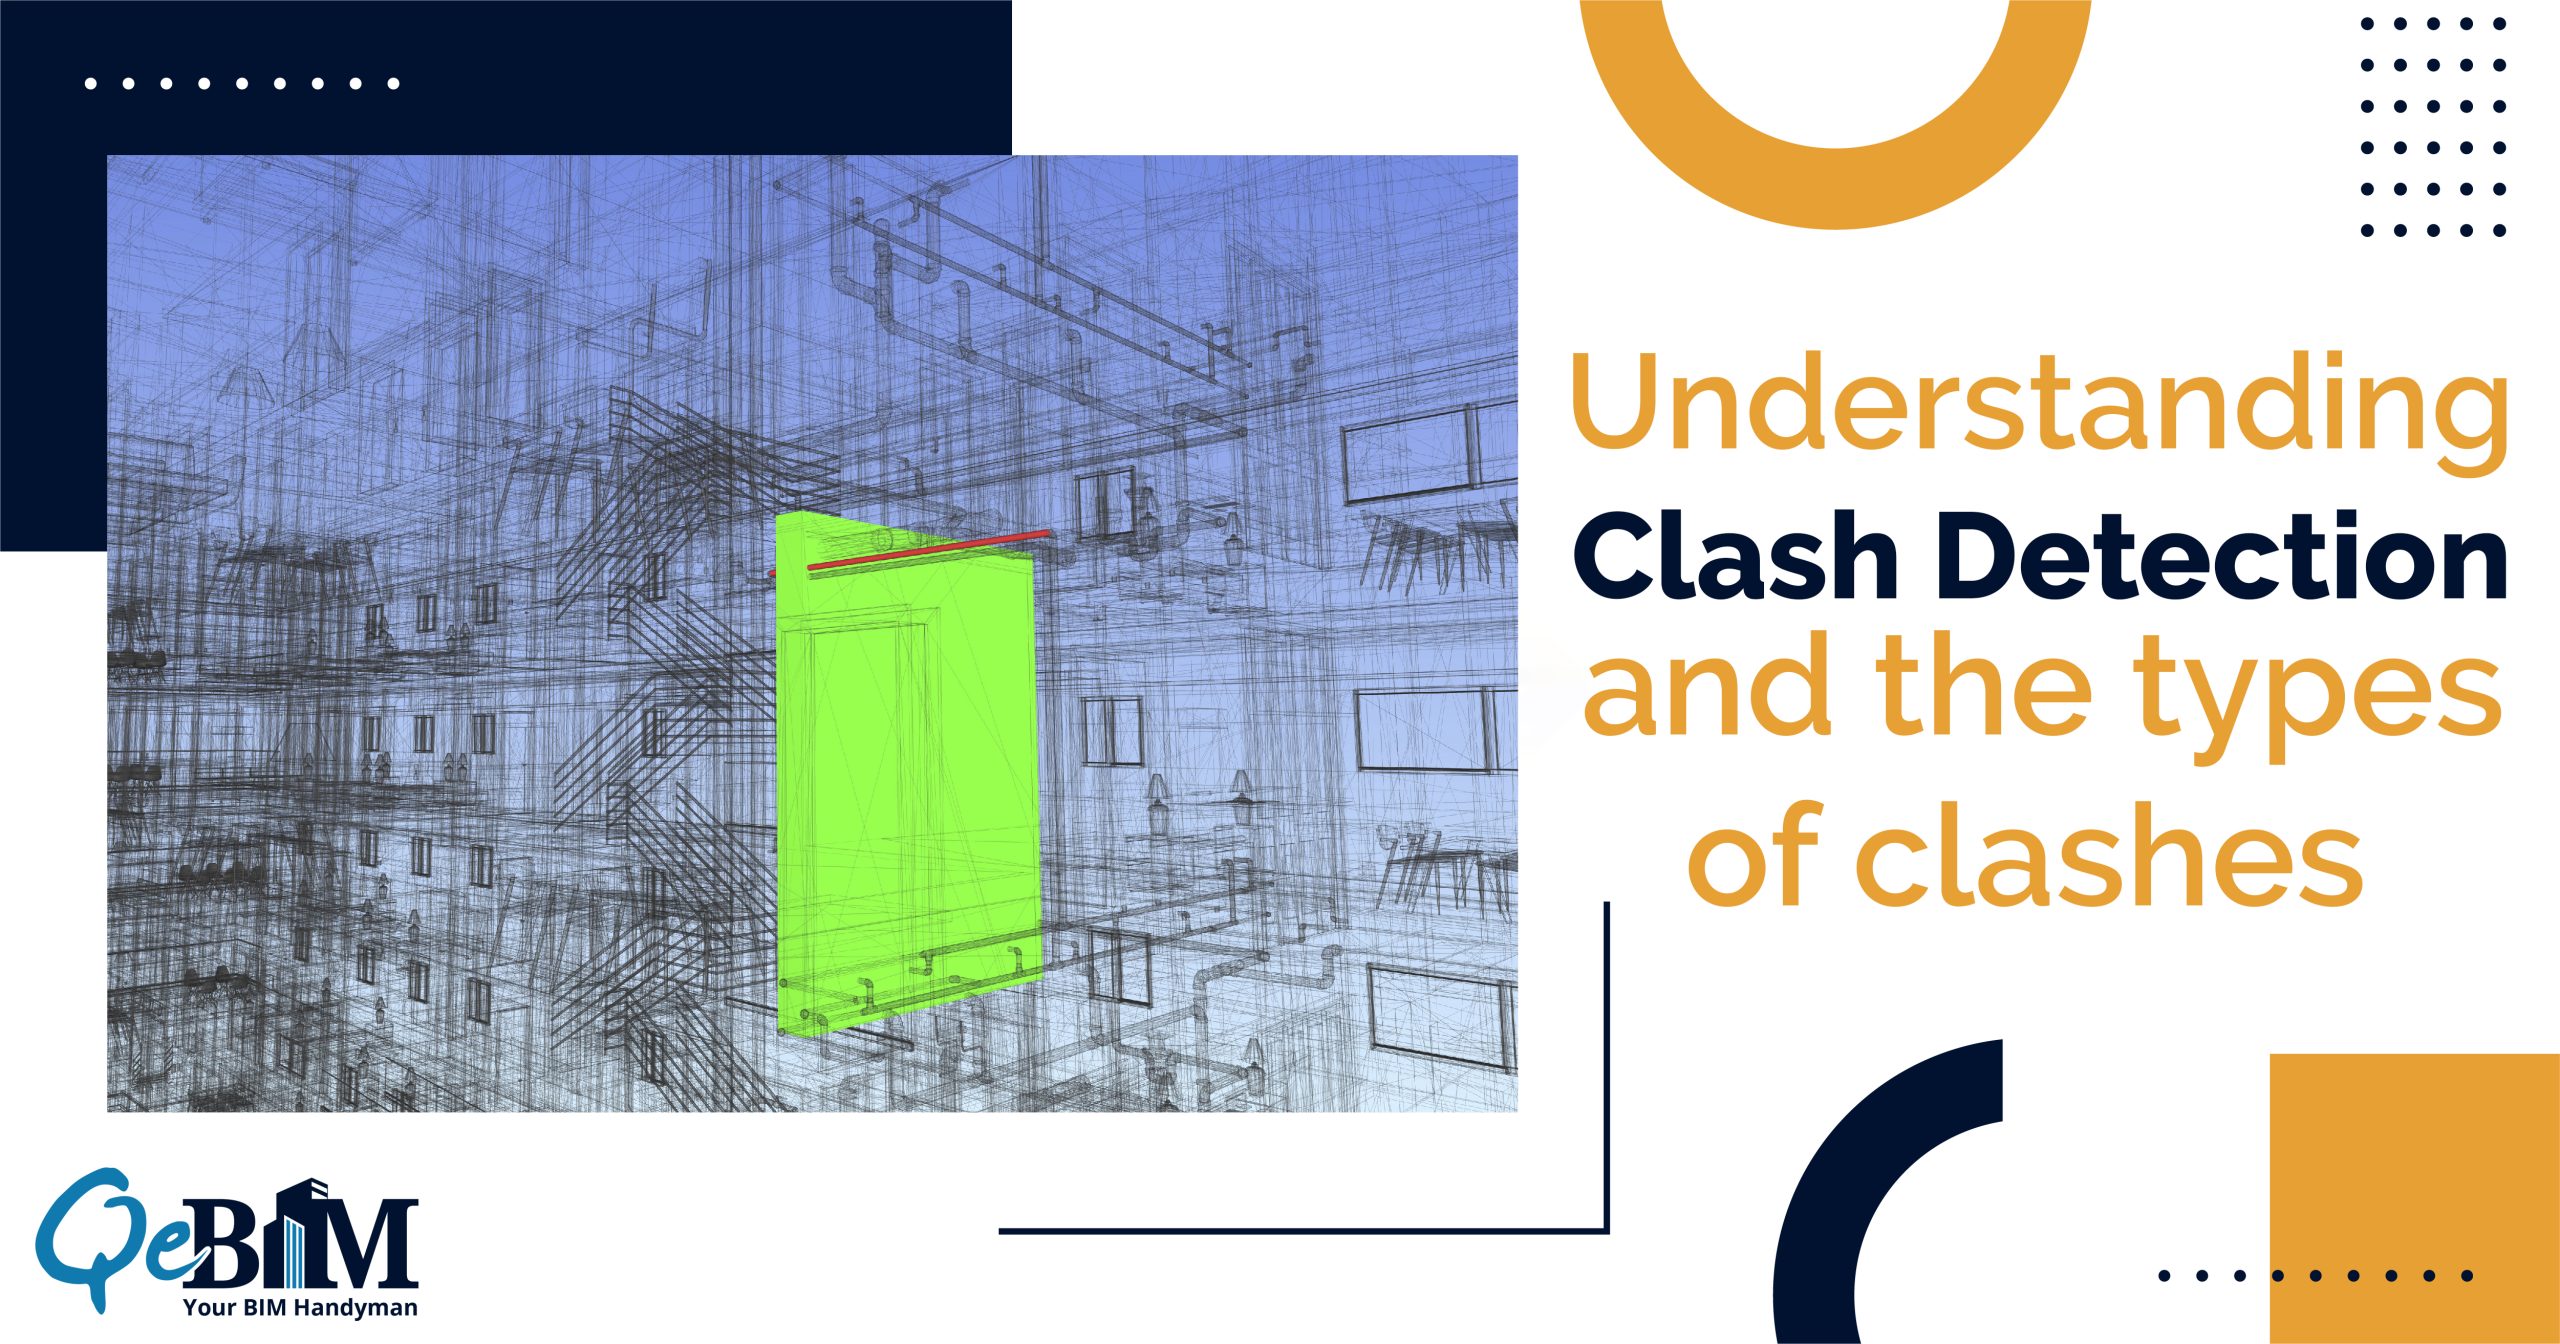 Understanding Clash Detection and the types of clashes